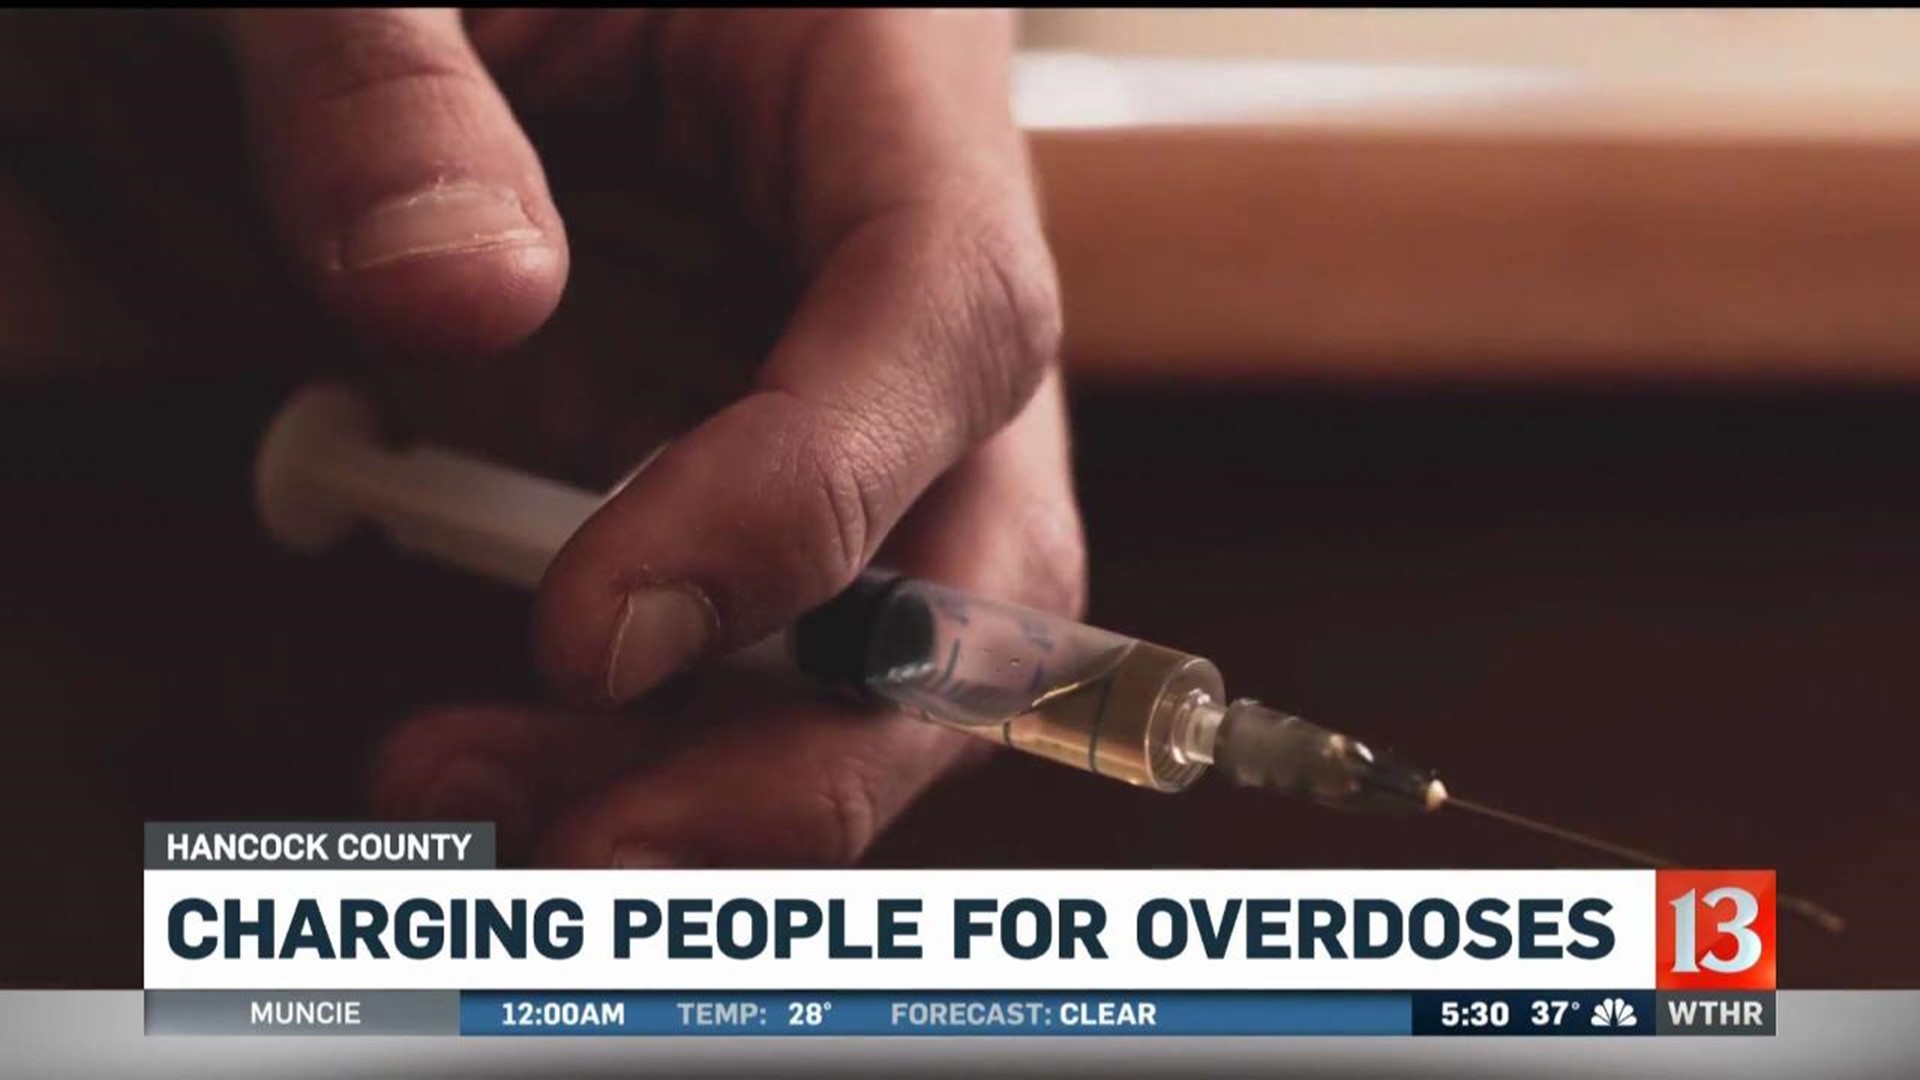 Charging people for overdoses